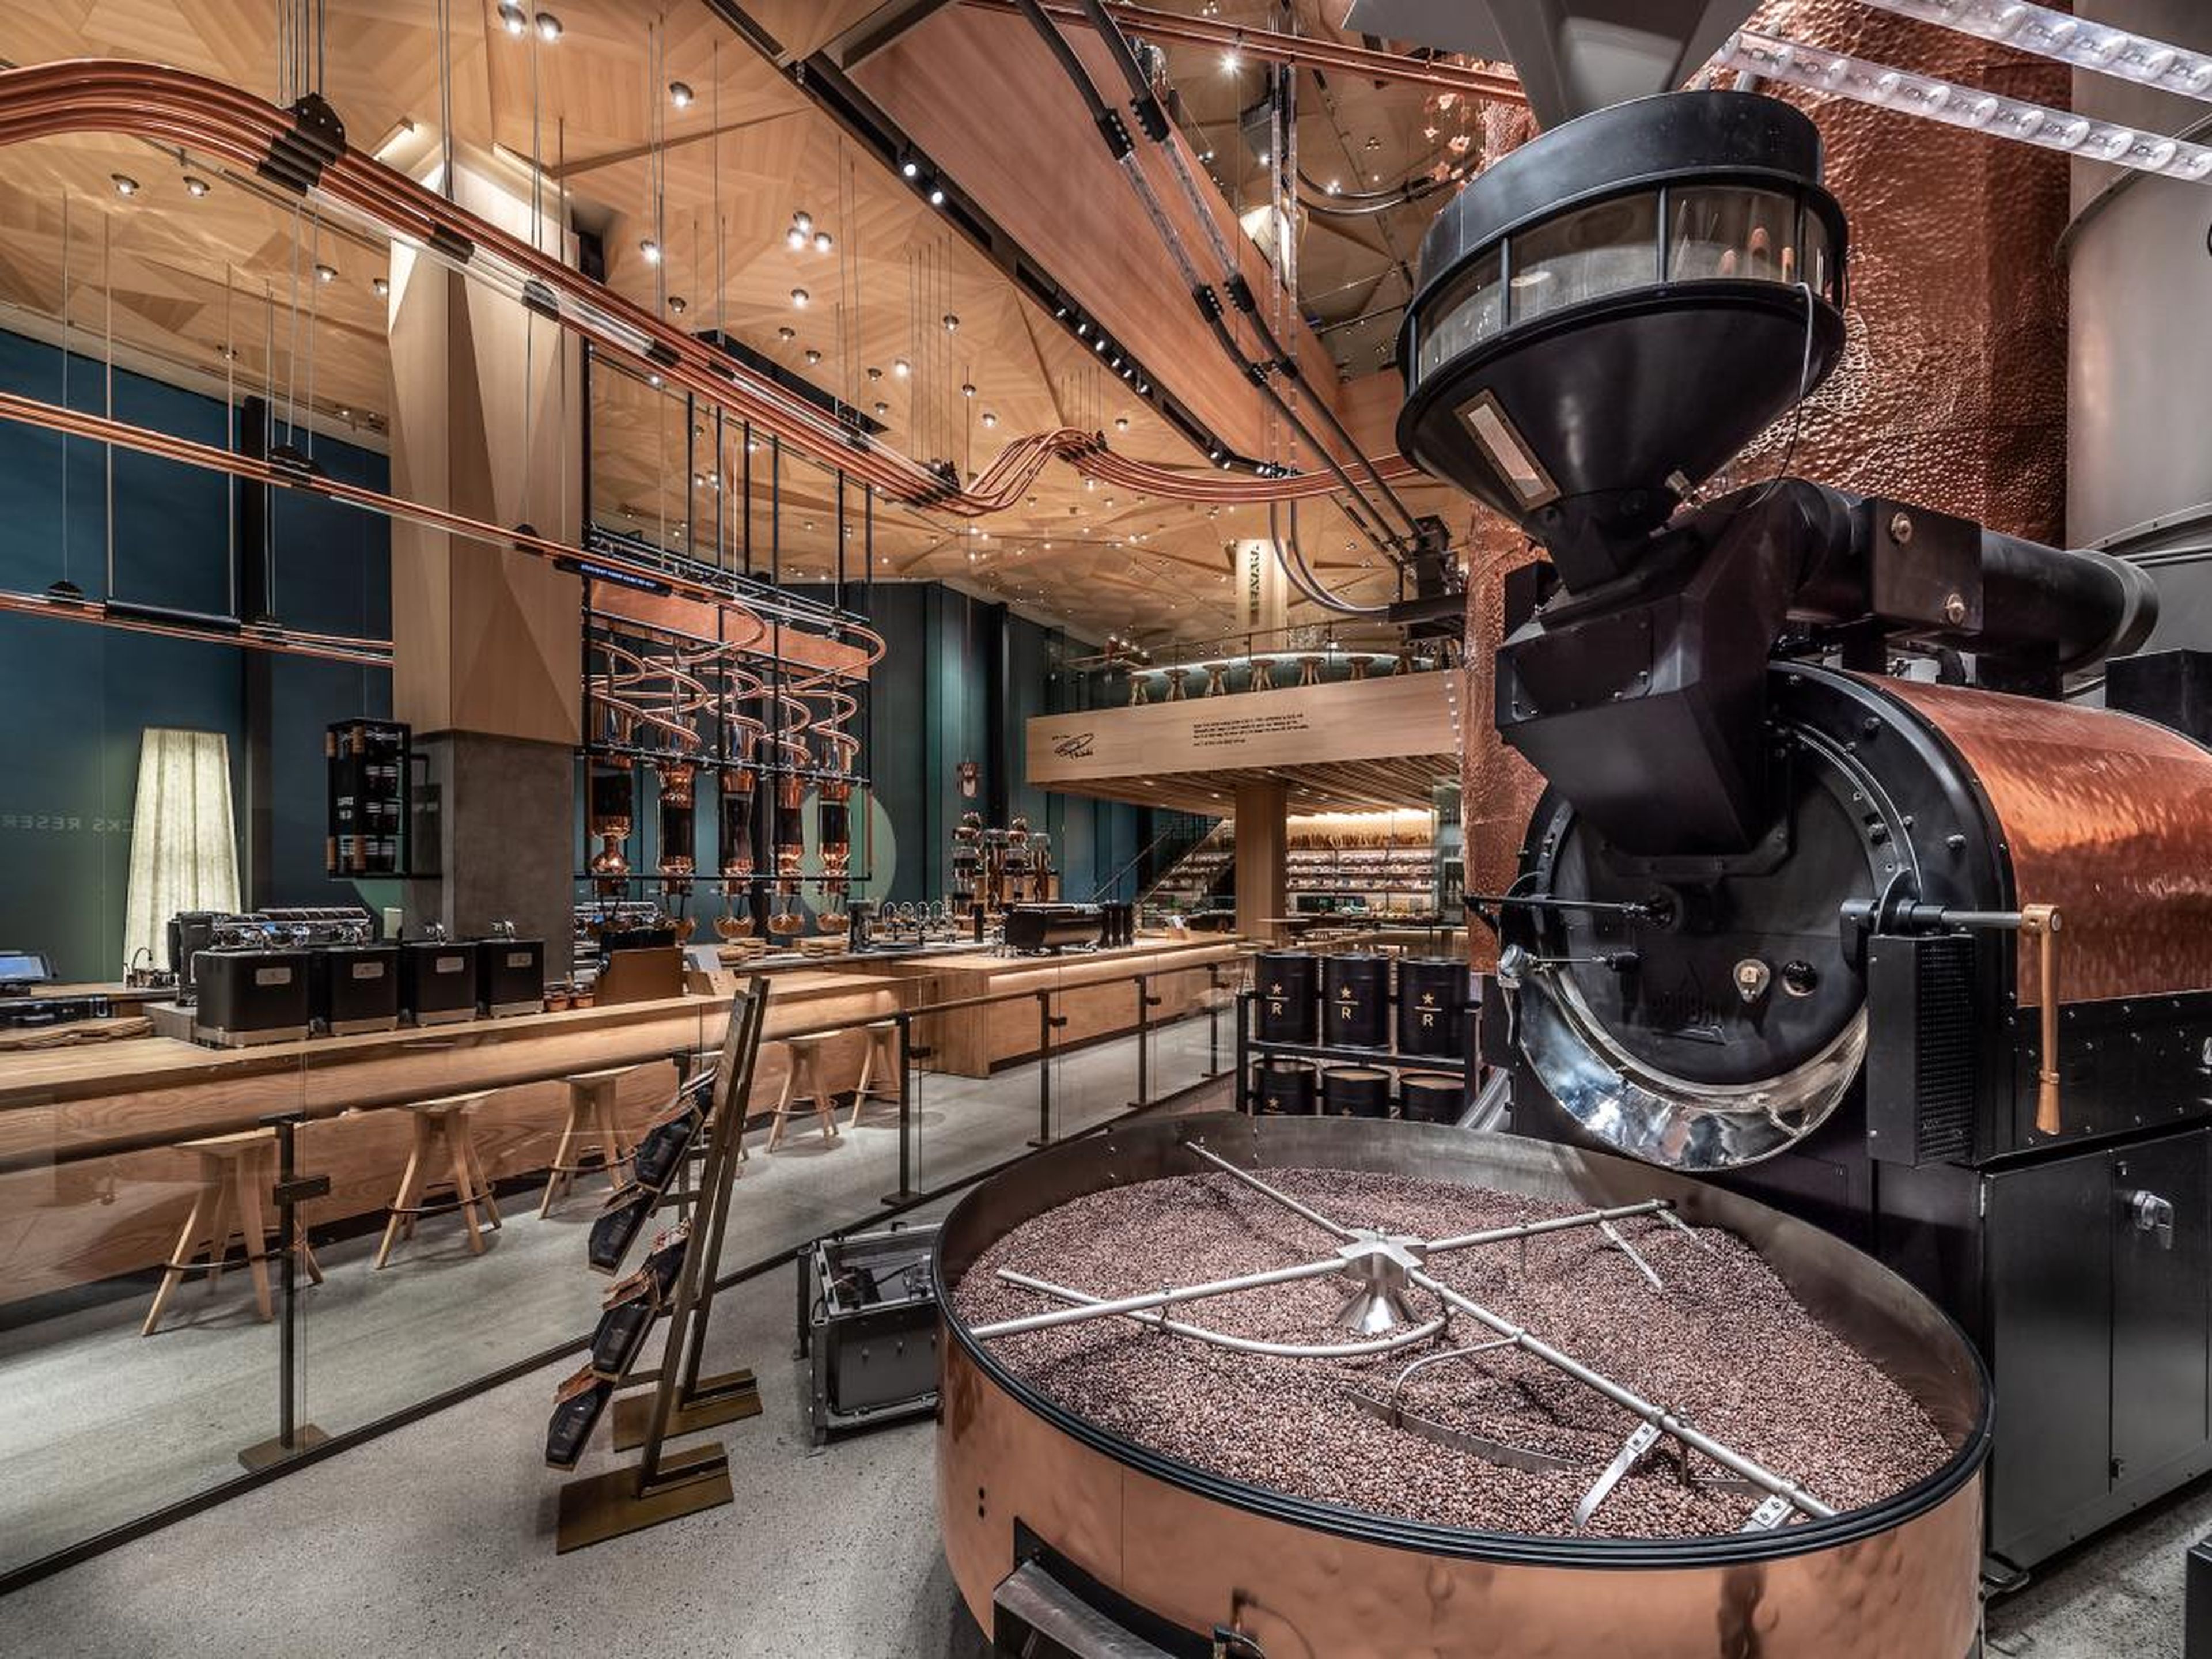 The Roastery has a functioning coffee roaster, which will produce almost 750 tons of coffee per year.